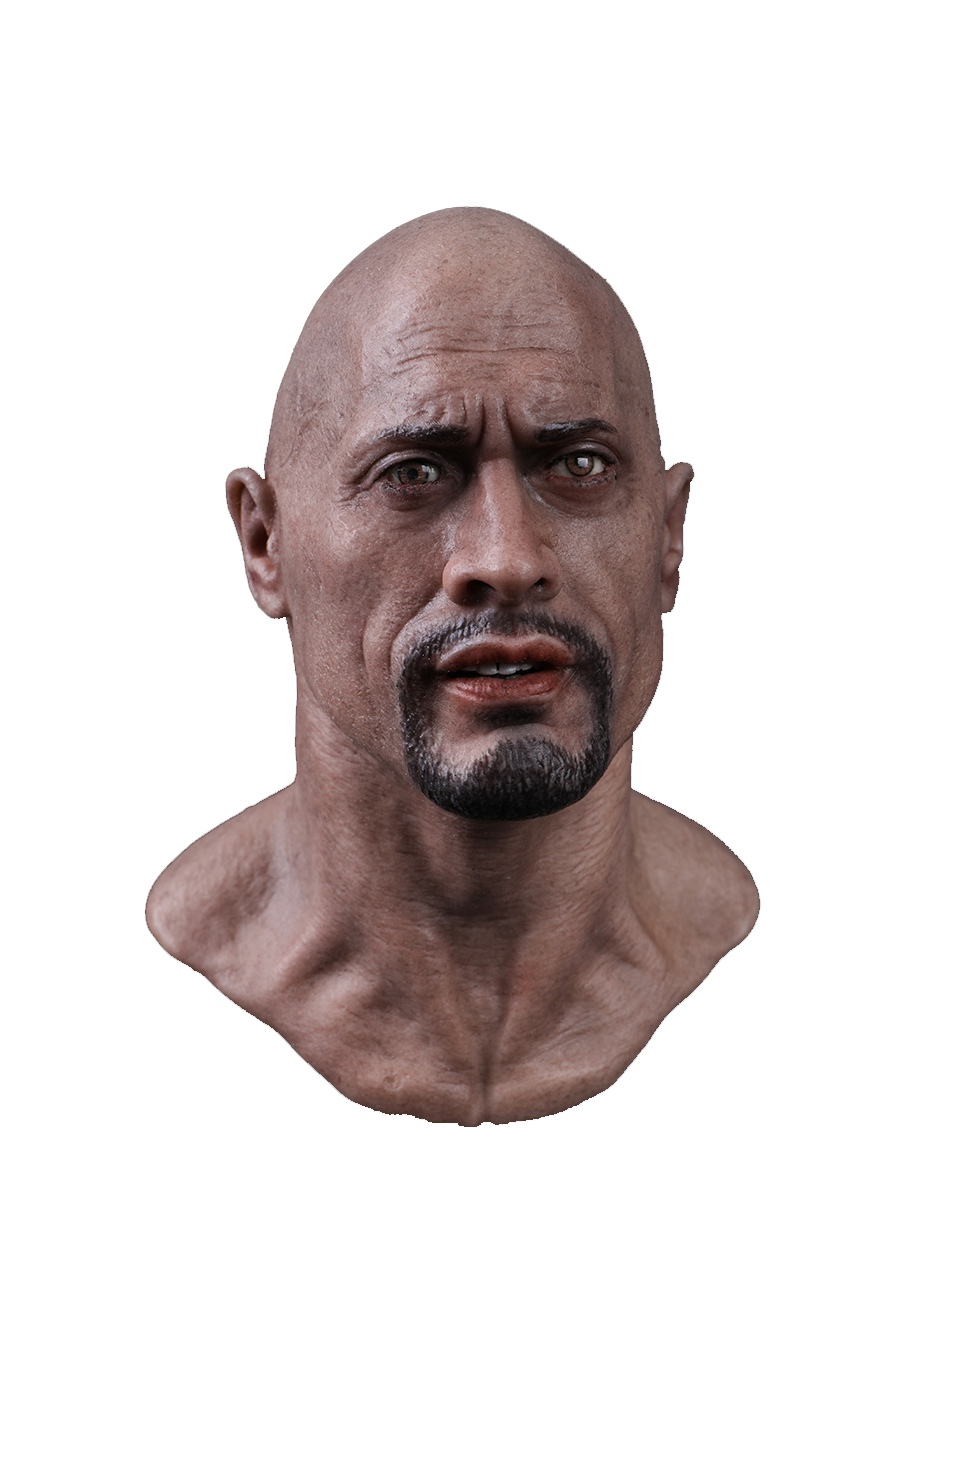 headsculpt - NEW PRODUCT: COOMODEL & CHENTOYS: 1/6 full silicone figurative head carving #SG001 20070910